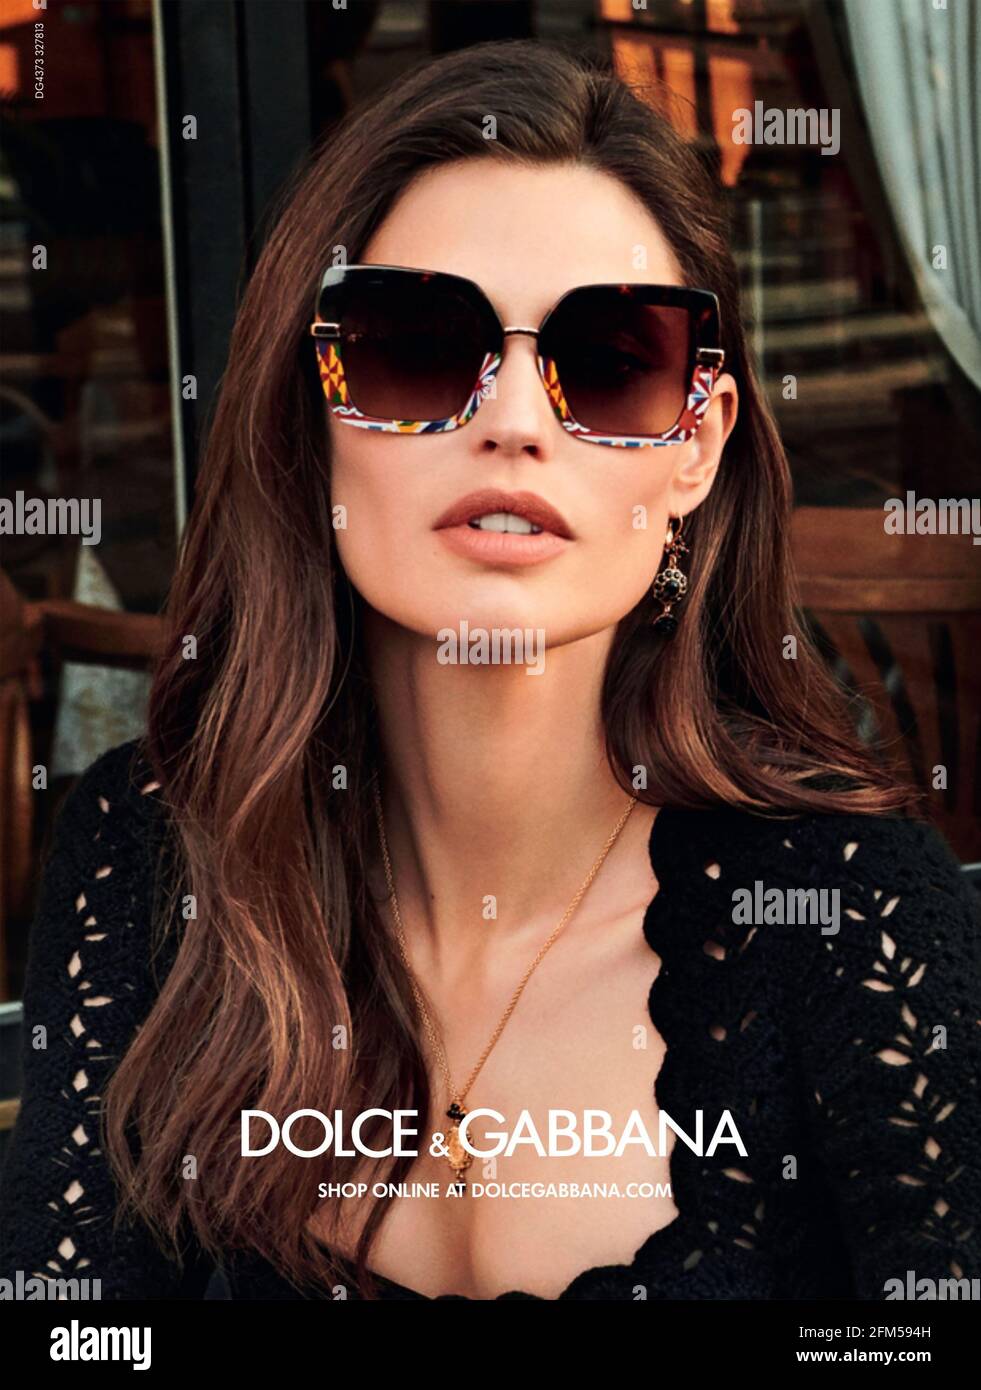 Page 2 - Dolce And Gabbana Sunglasses High Resolution Stock Photography and  Images - Alamy